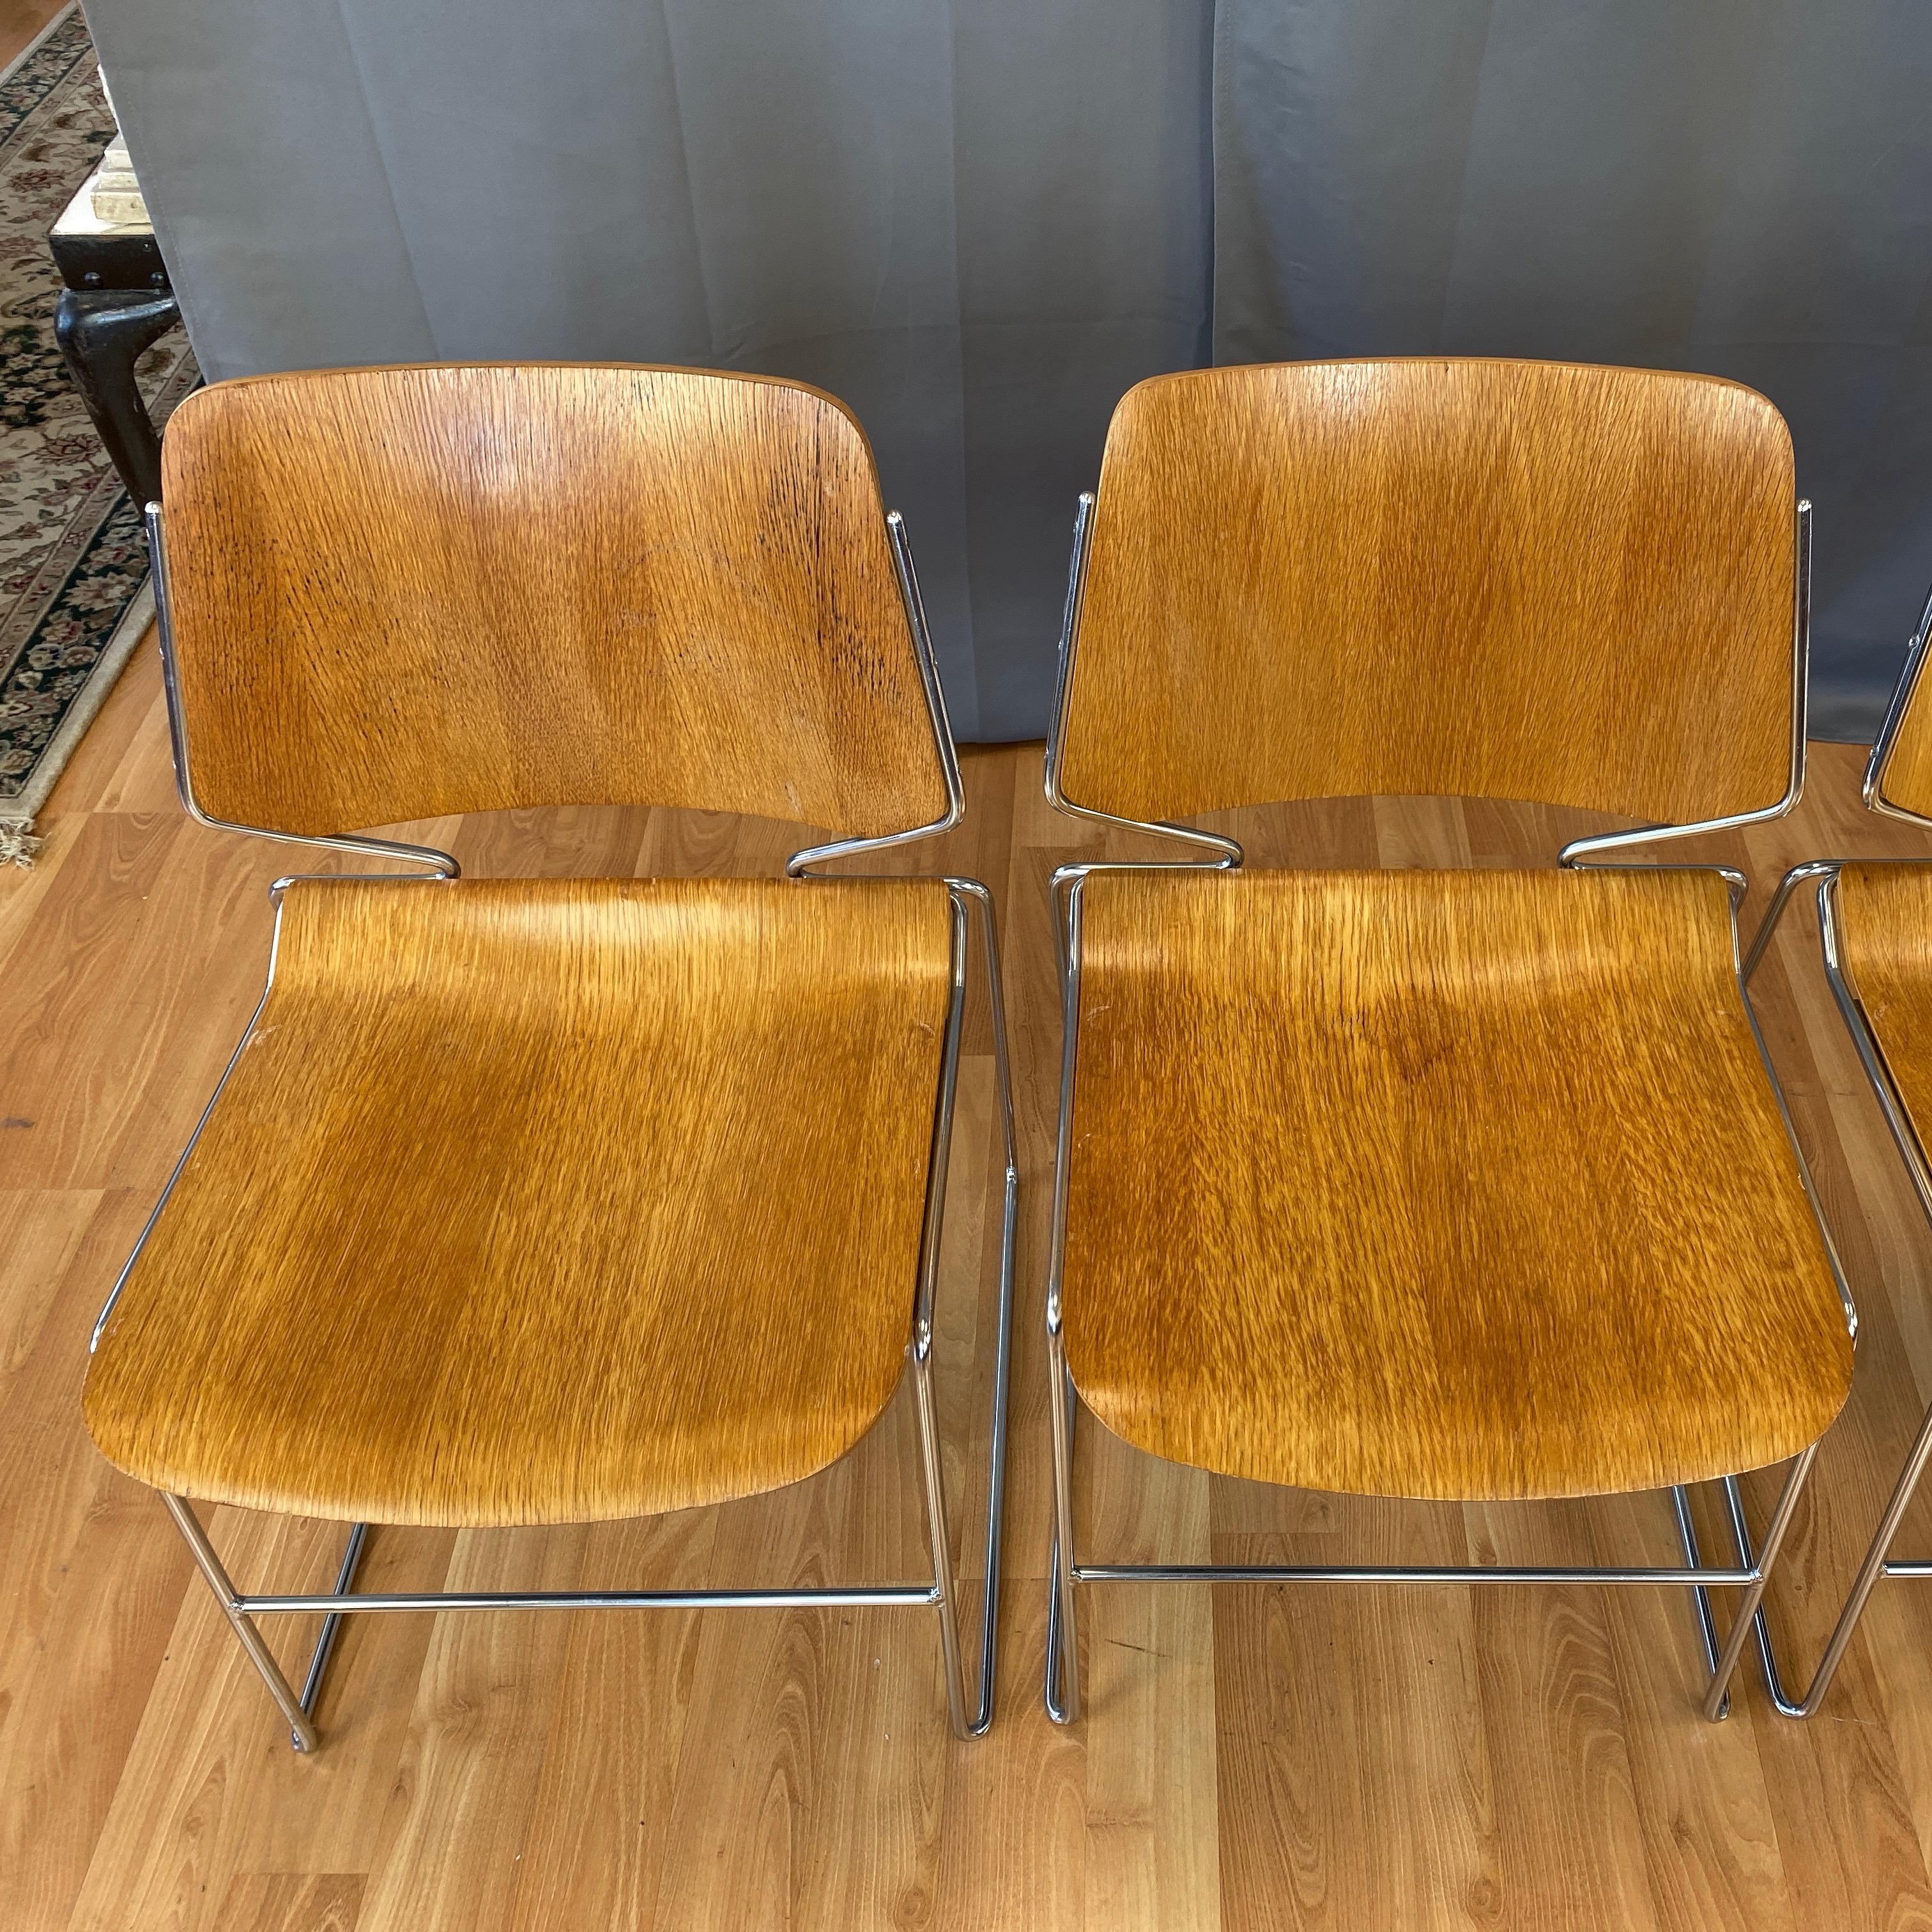 Mid-20th Century David Rowland Oak 40/4 Stacking Chairs and Unusual Table, Five-Piece Set